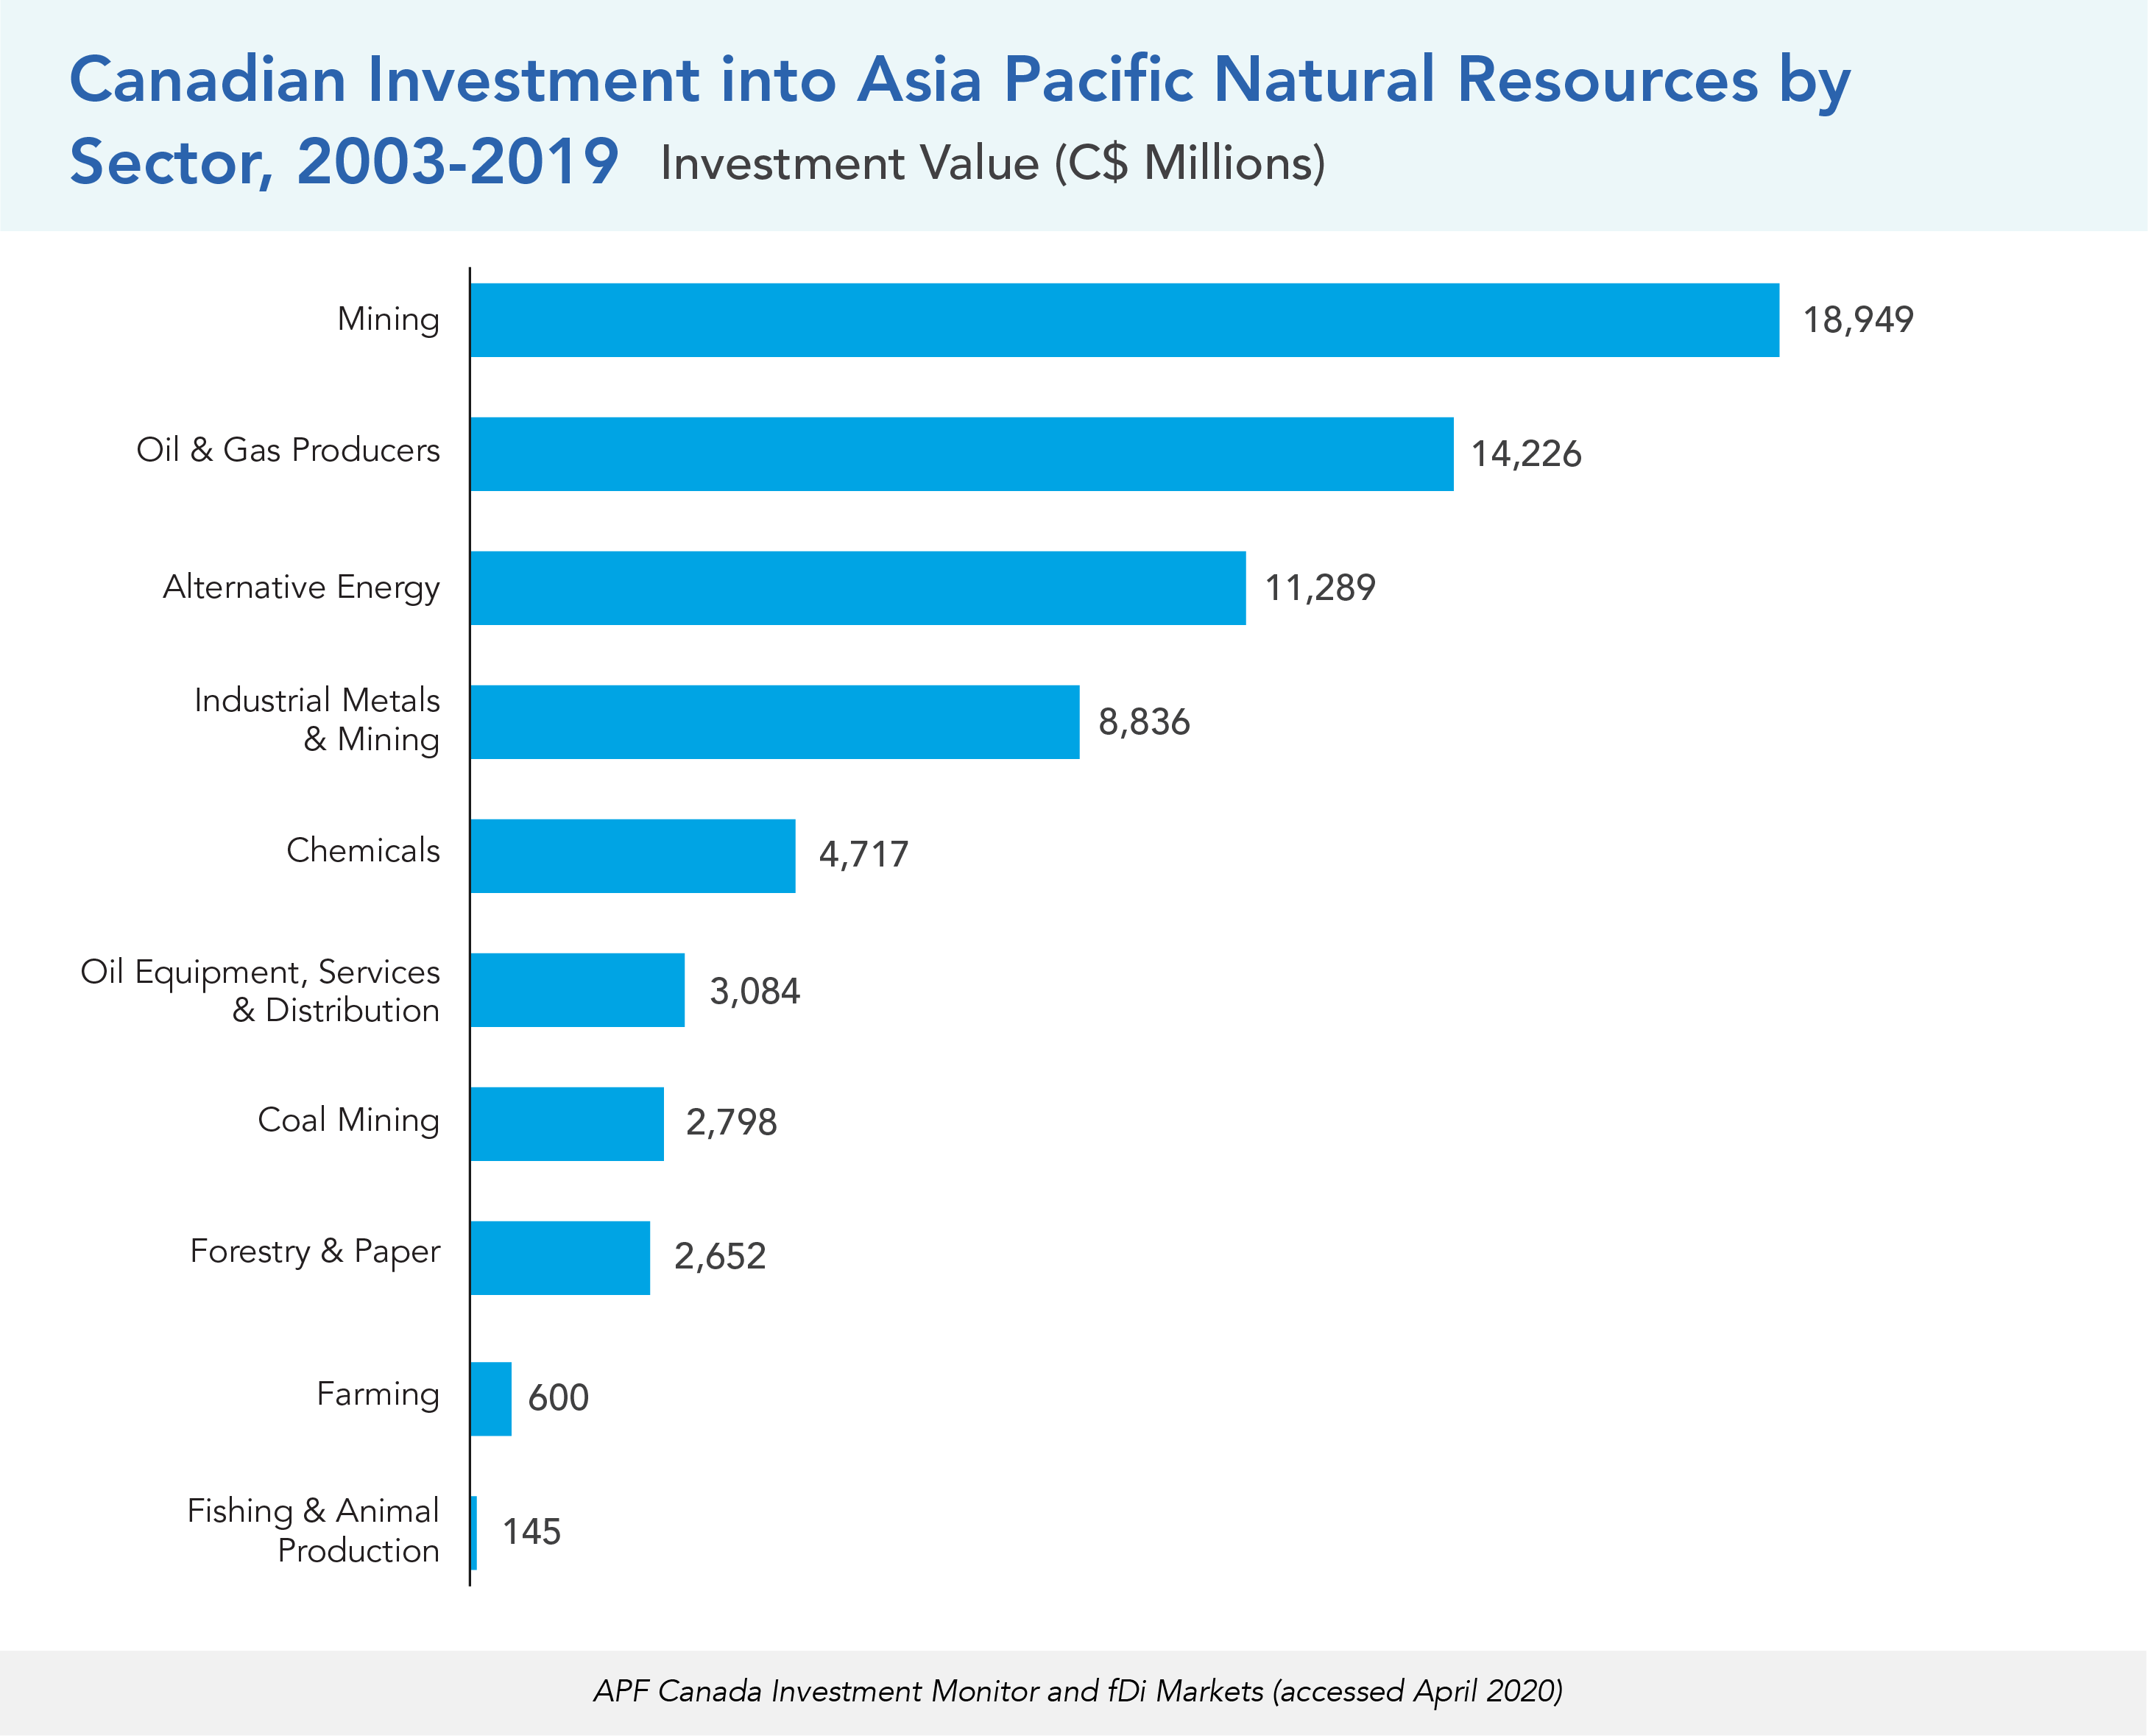 Canadian Investment into Asia Pacific Natural Resources by Sector, 2003-2019